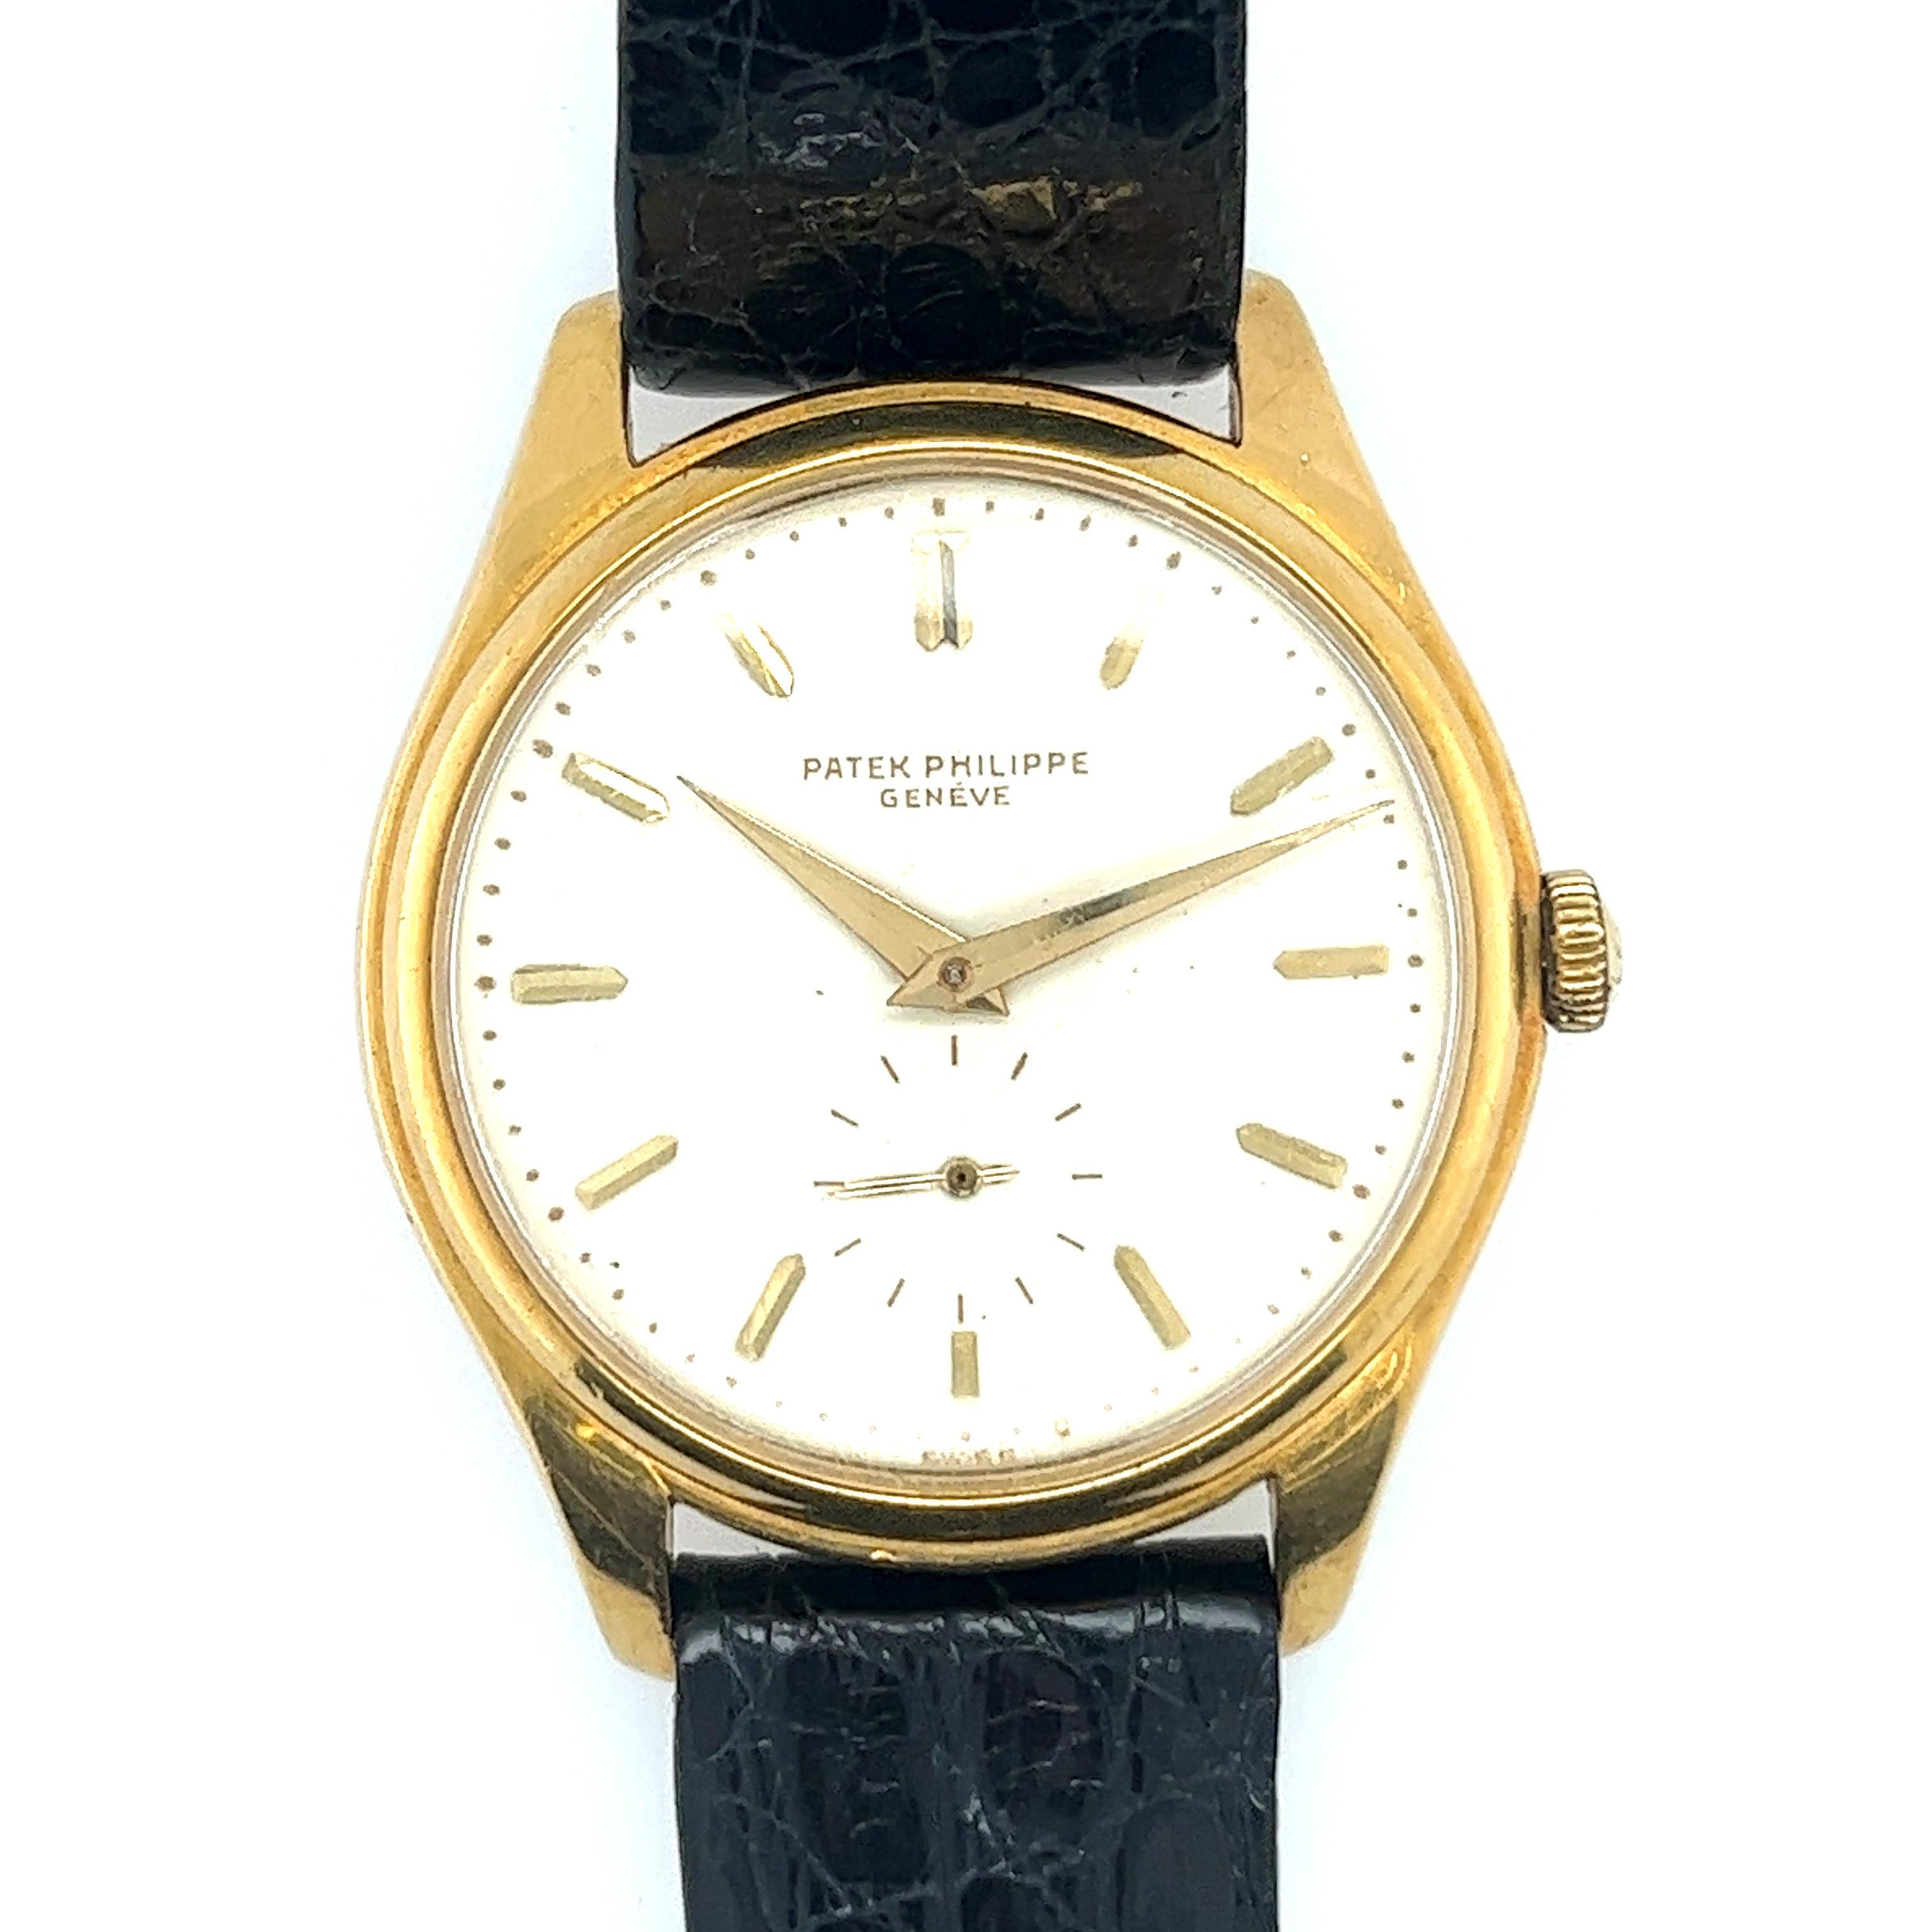 This pre owned Patek Philippe Calatrava Ref 3919  is considered to be the ultimate Vintage Patek watch. It has a Porcelain enamel dial, screw down back and  is water resistant. It has an  18k yellow gold case and is stamped on the back with 18k.  It